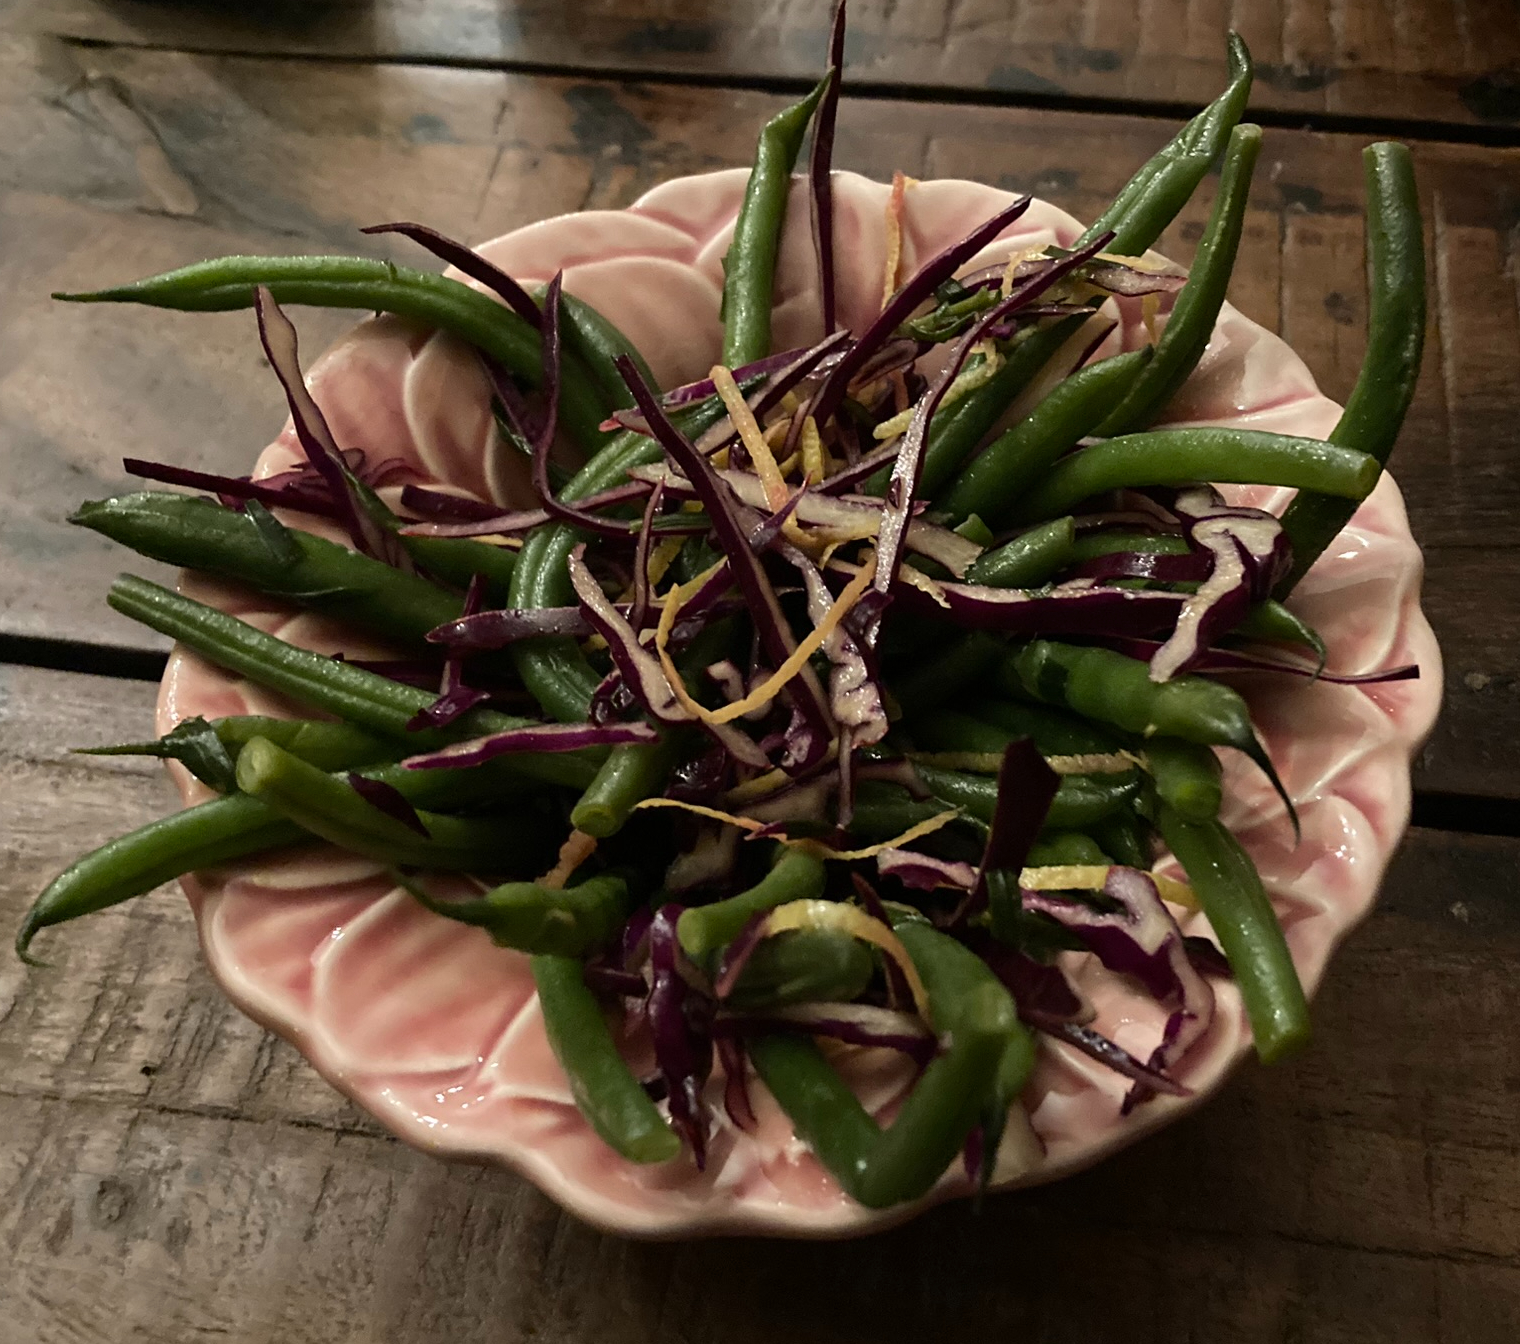 The green beans in tarragon and lemon